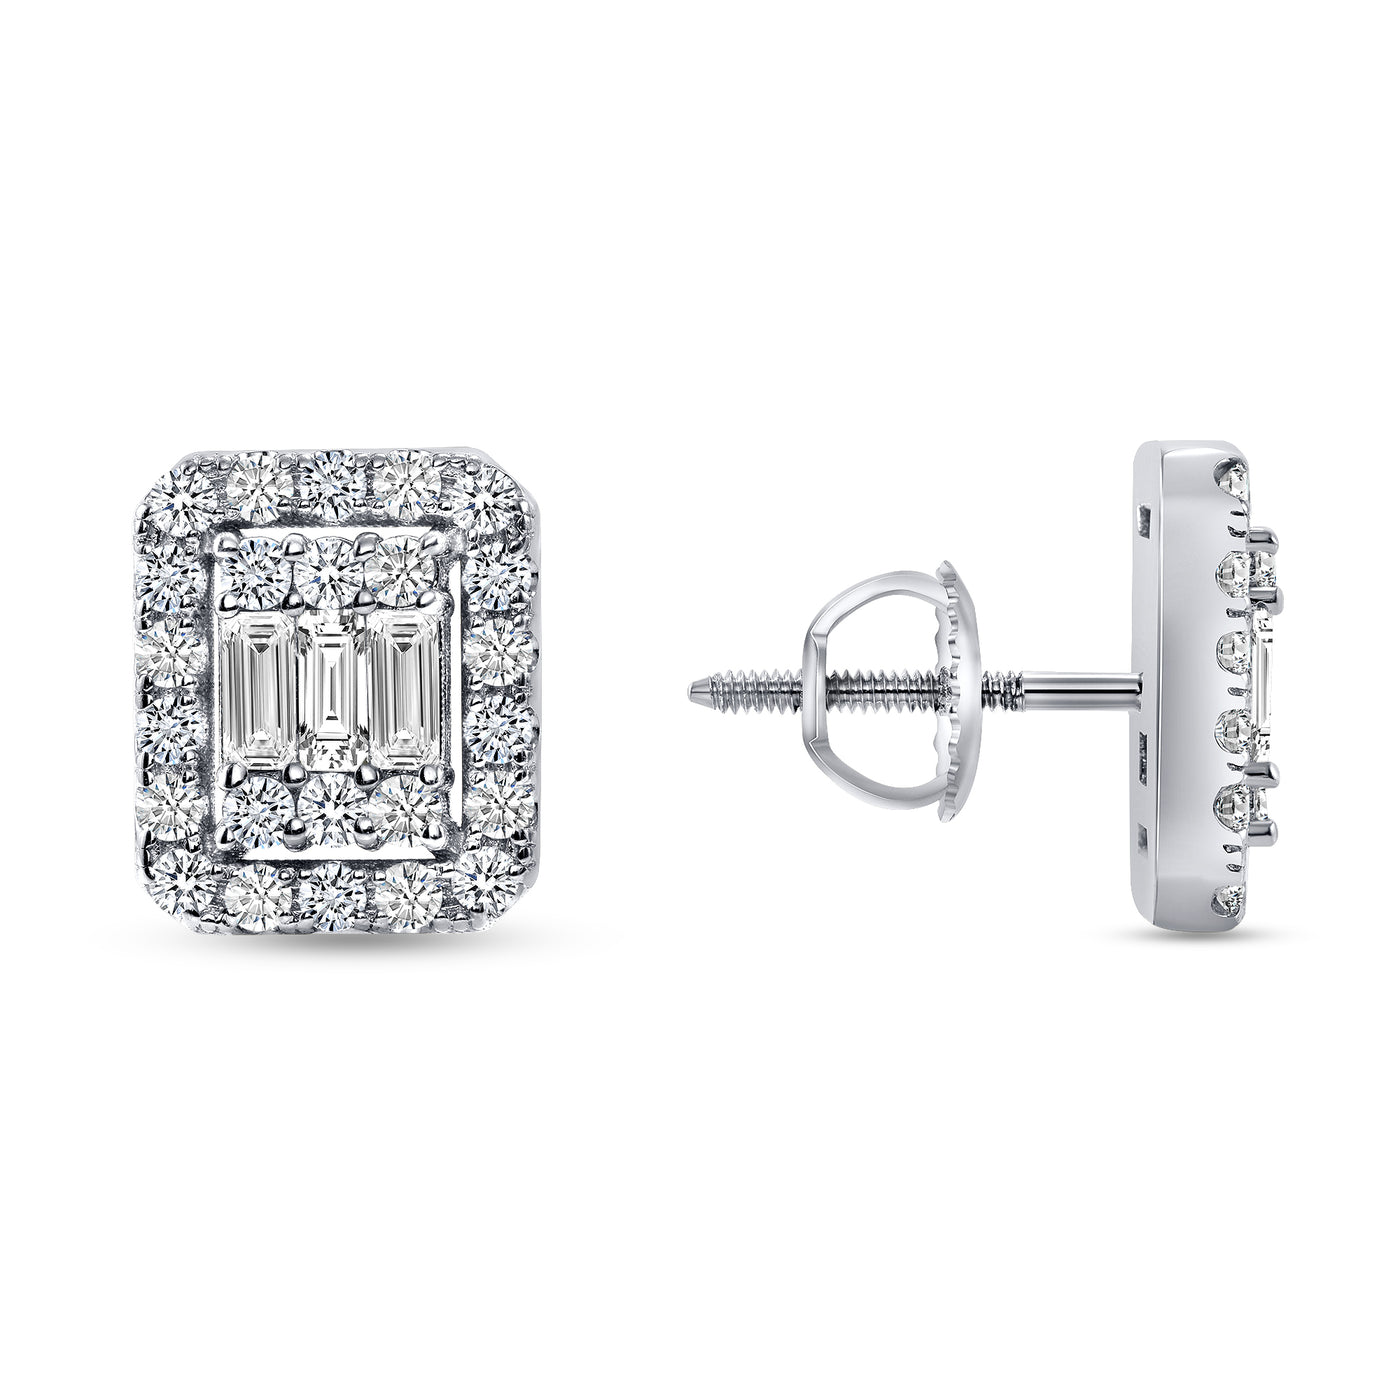 1.30 Carat Baguette and Round Diamond Earrings